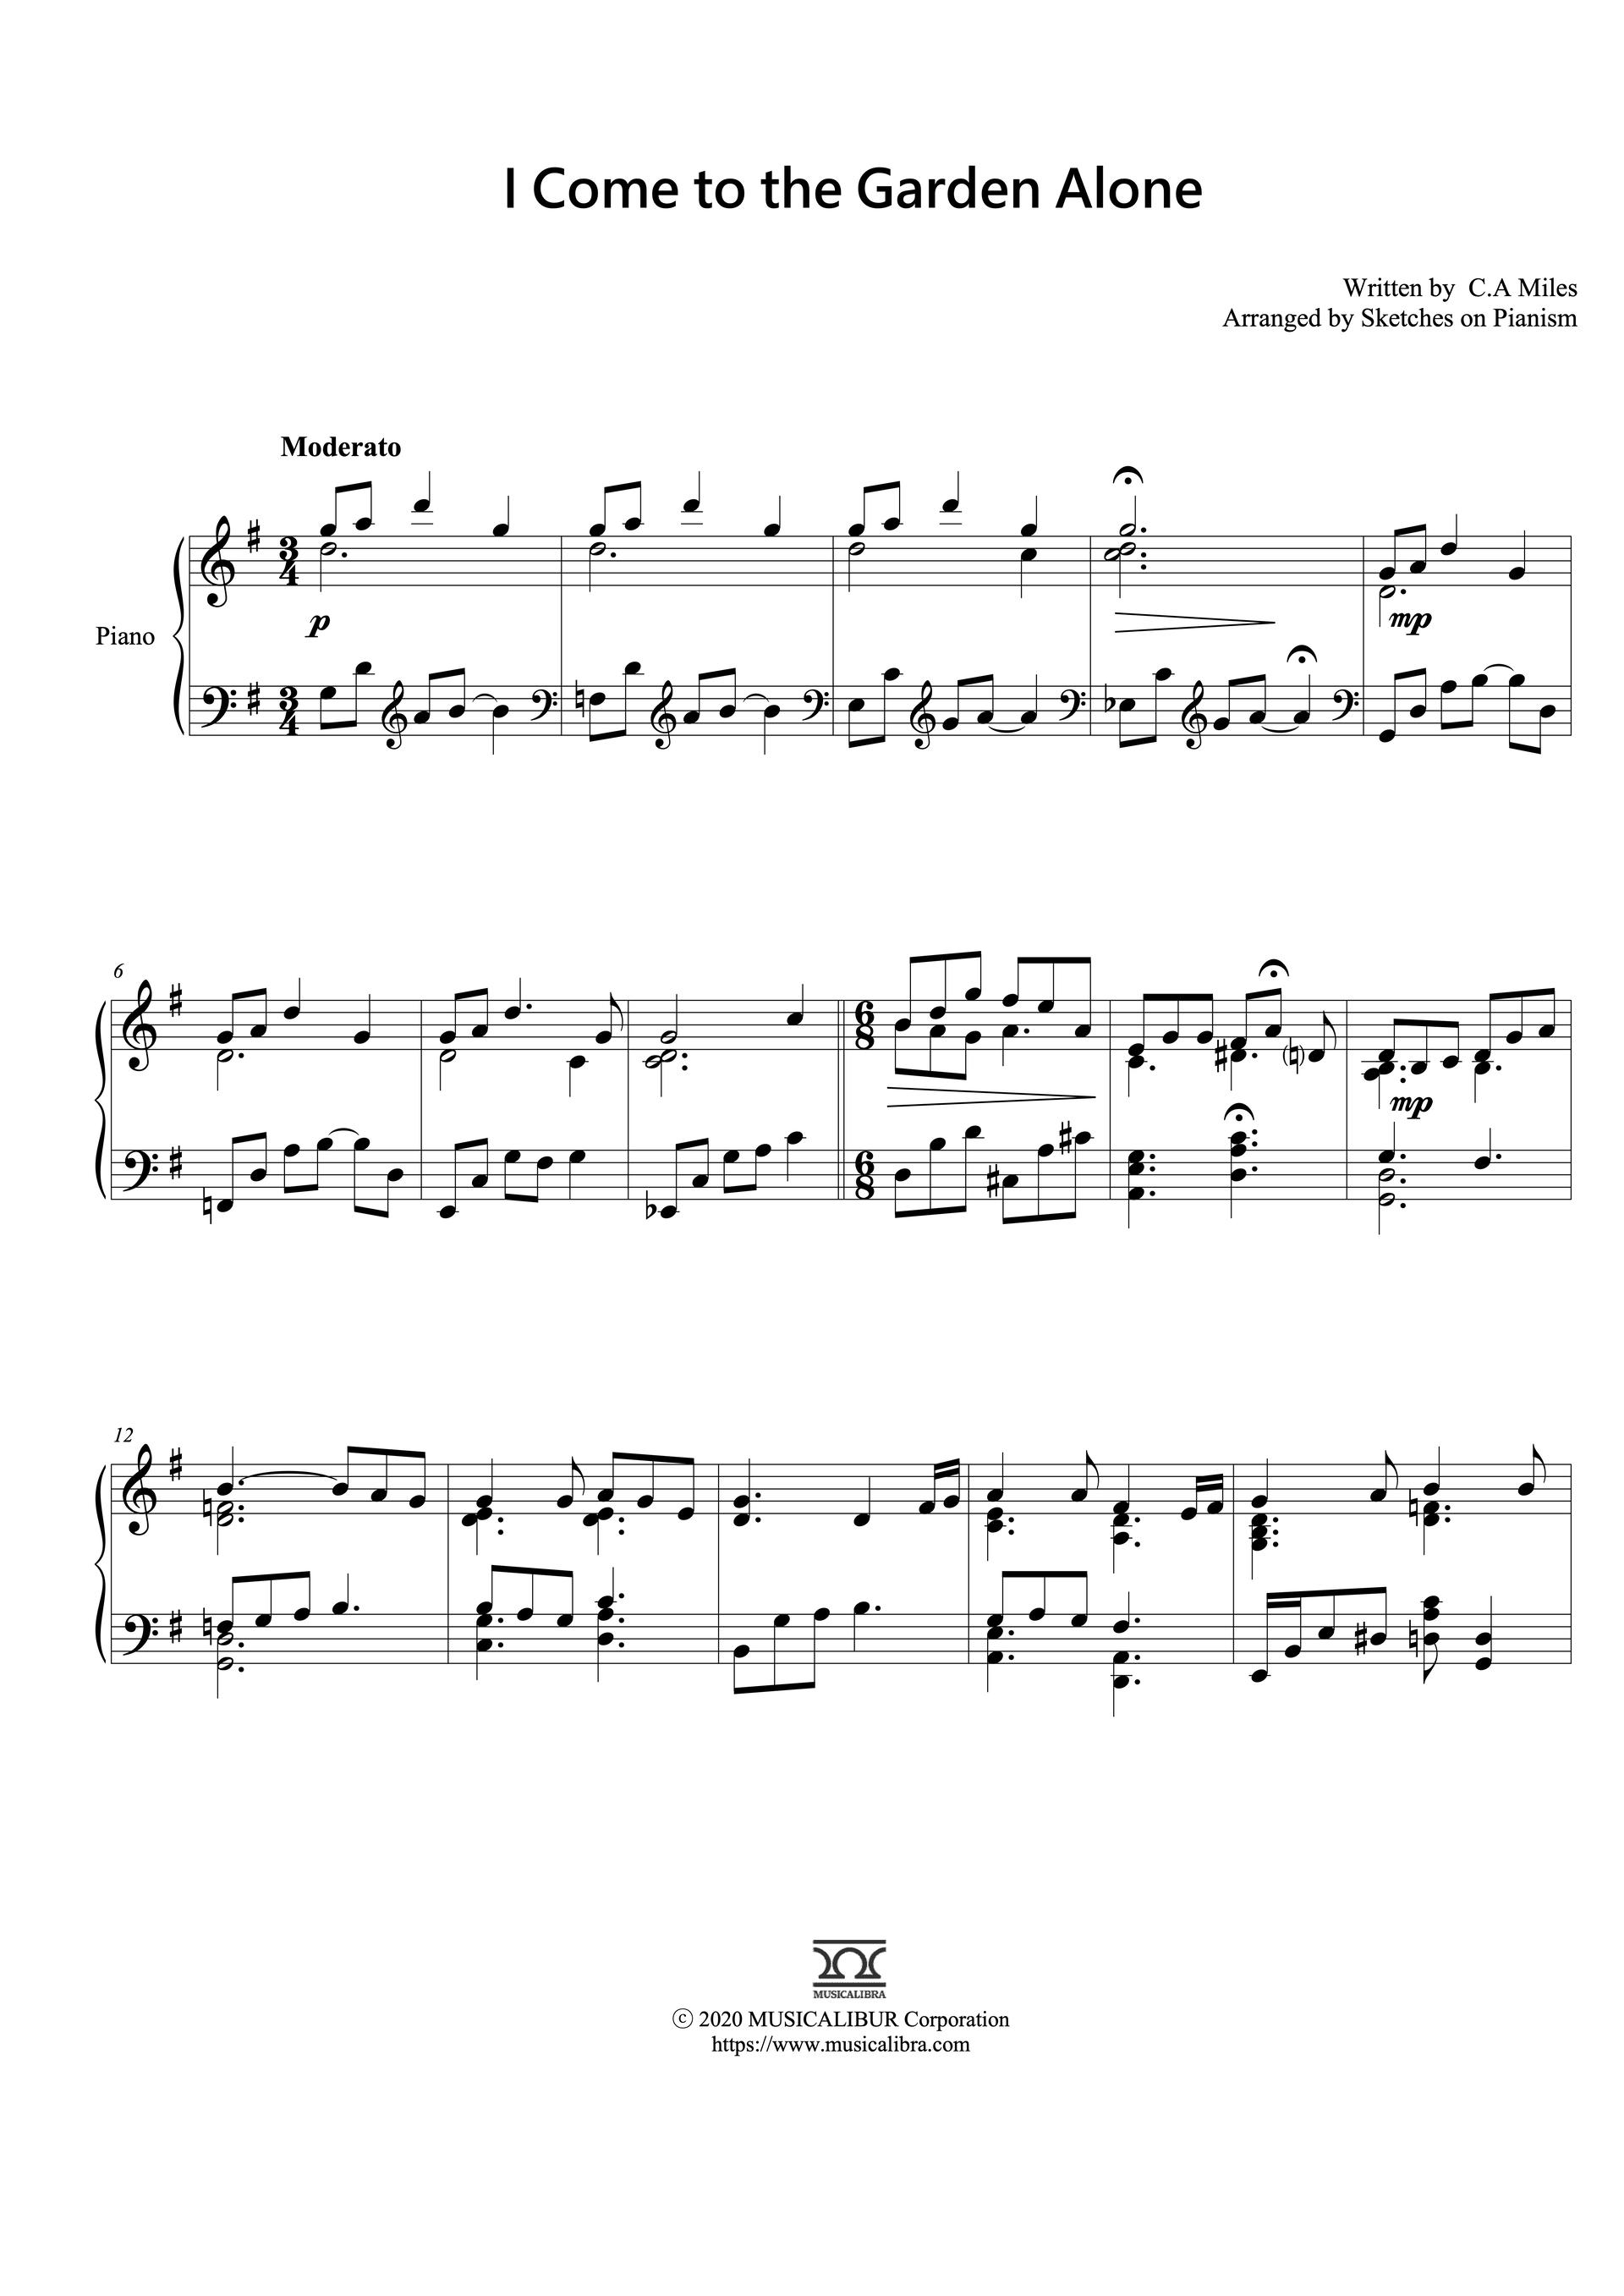 Sheet music of I Come to the Garden Alone arranged for piano solo preview page 1